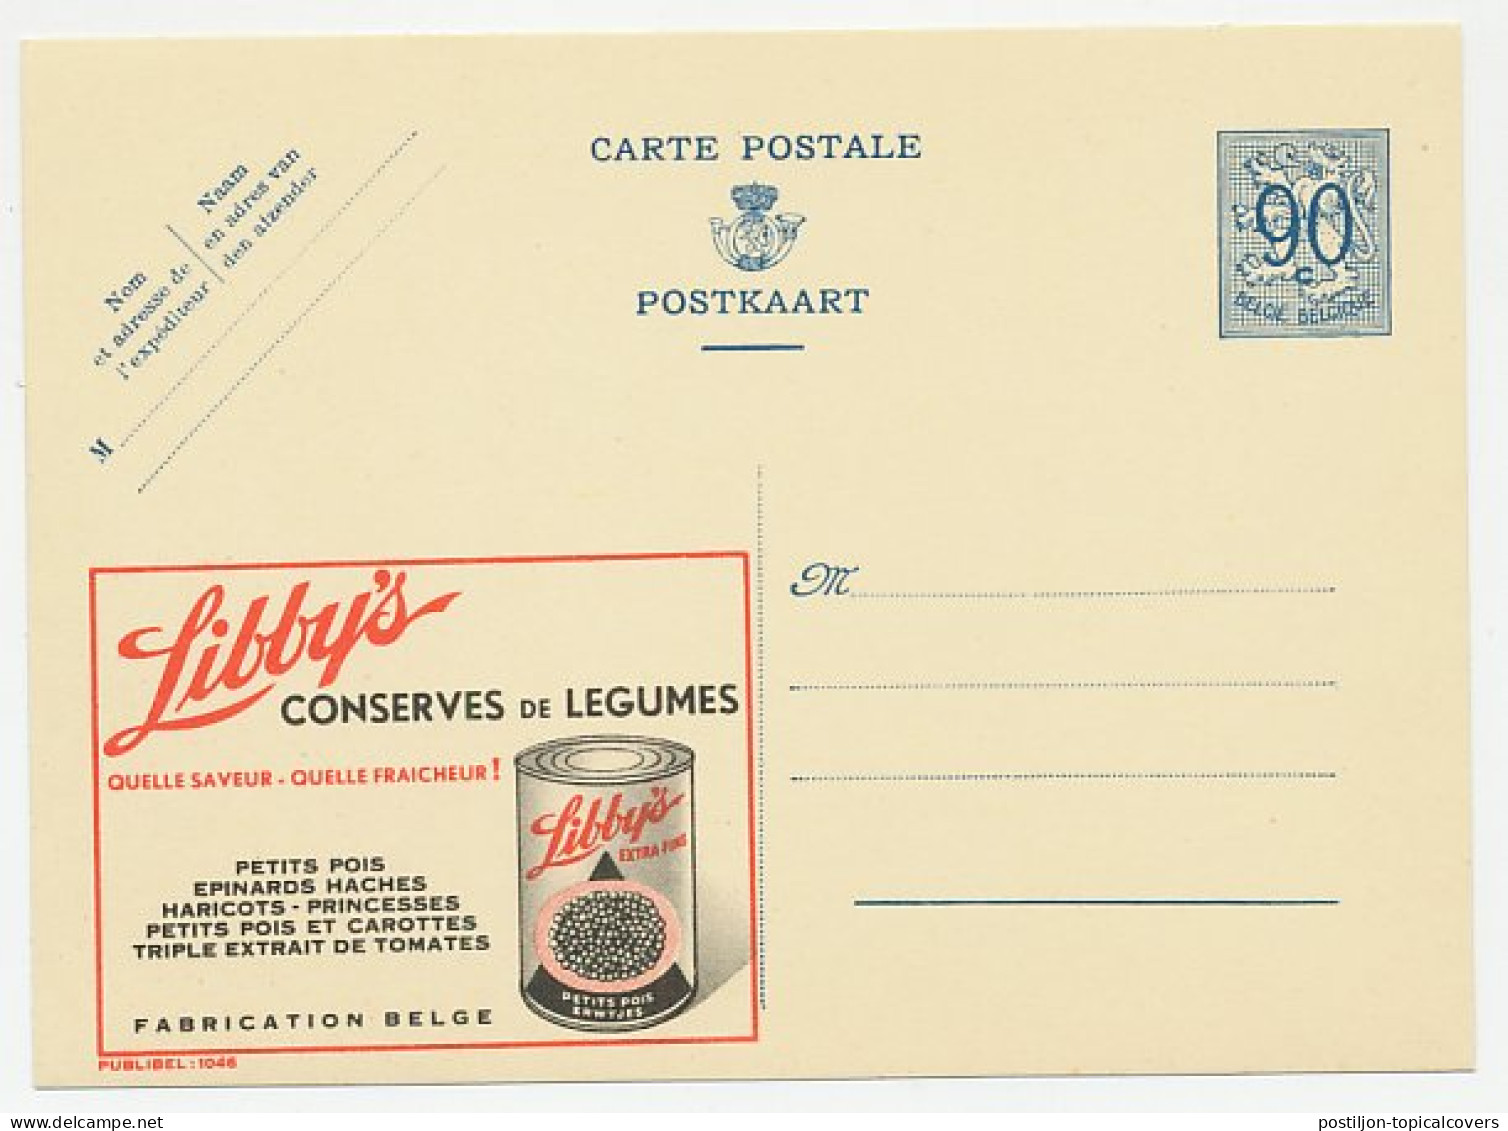 Publibel - Postal Stationery Belgium 1951 Canned Vegetables - Pea - Spinach - Beans - Carrots - Tomatoes - Légumes